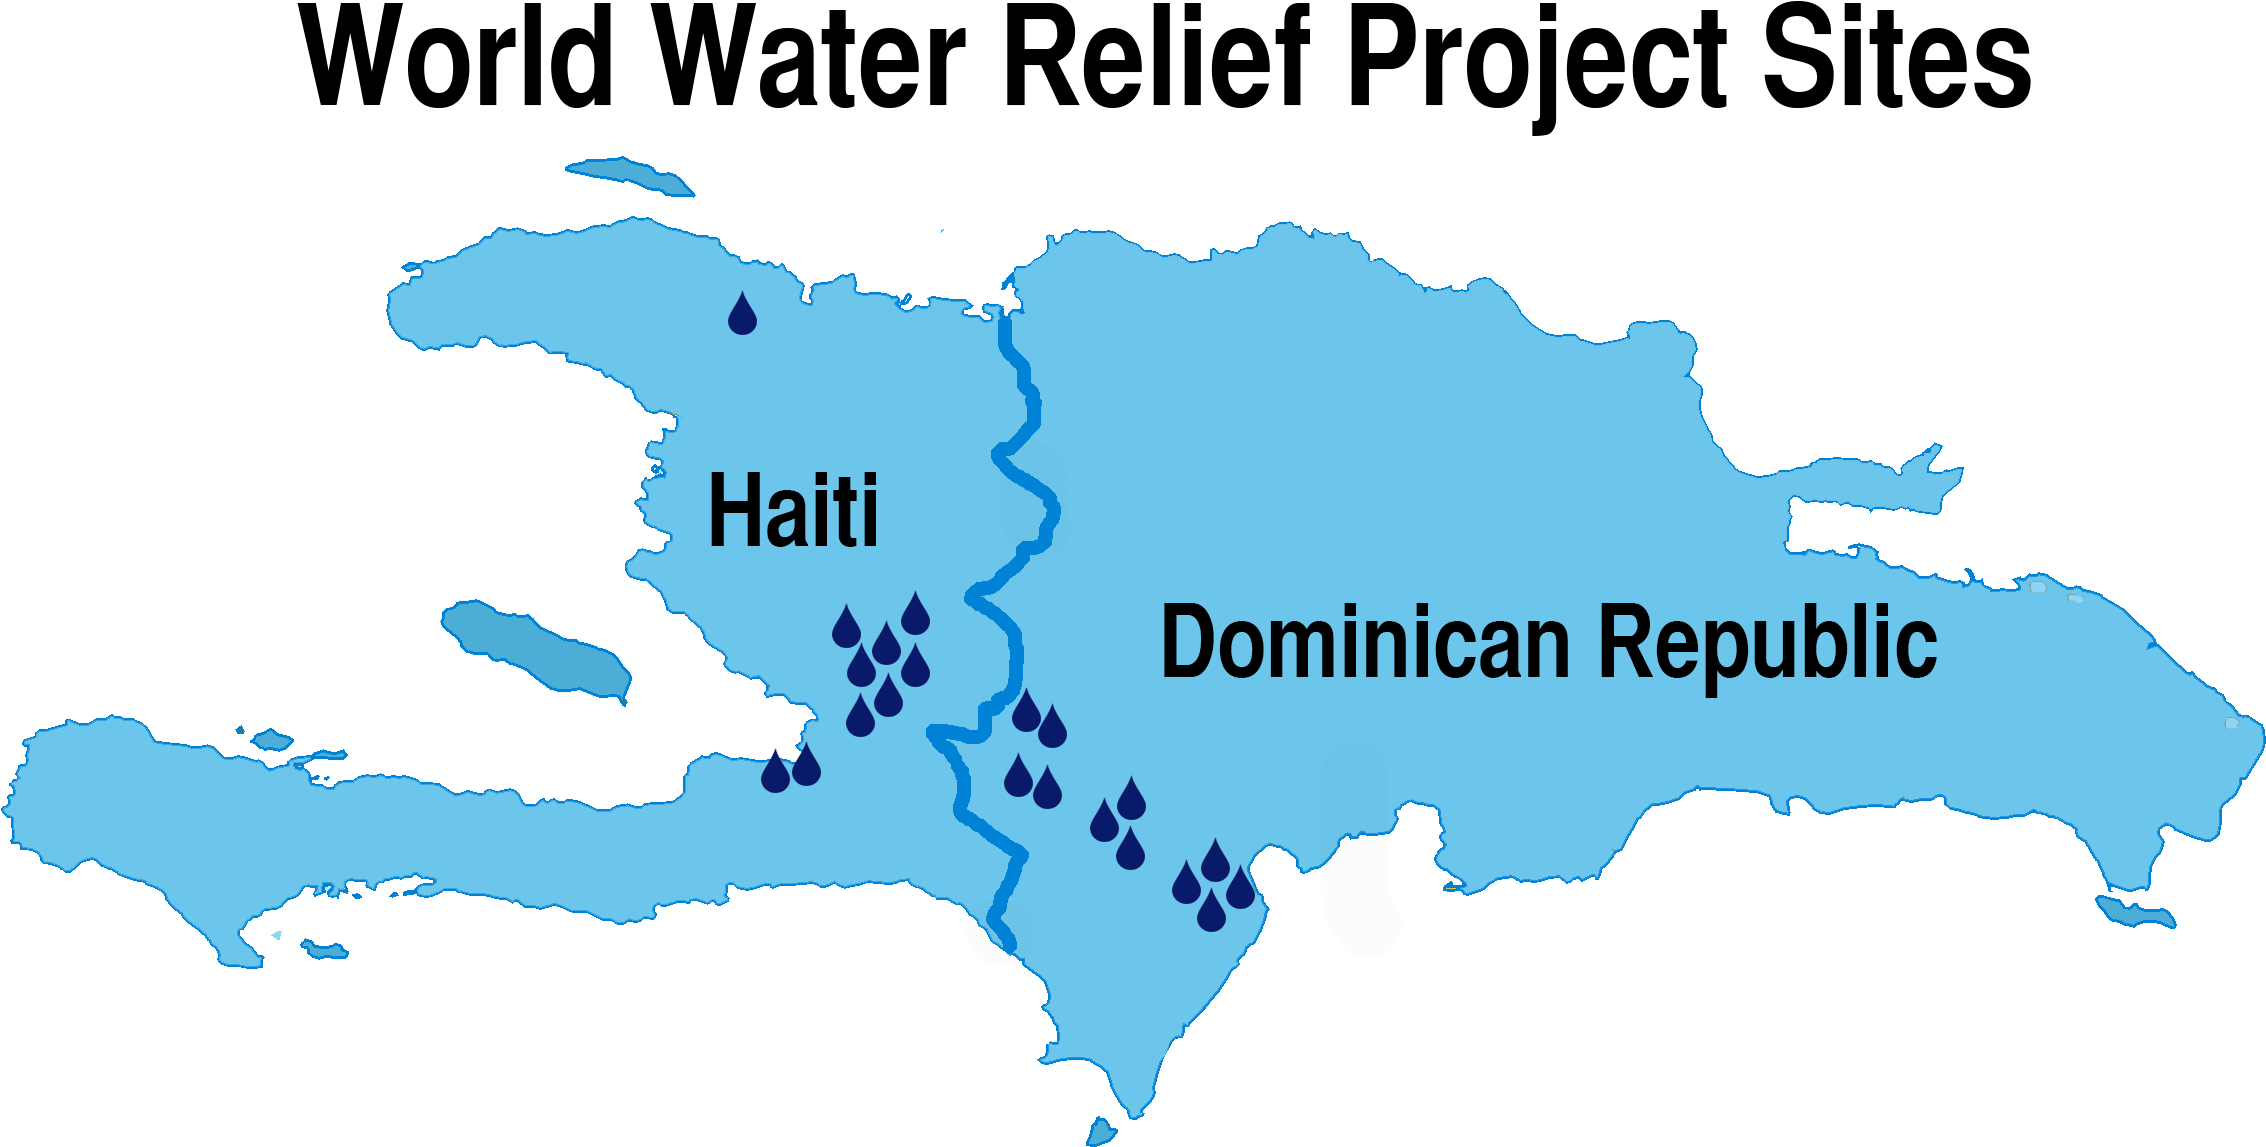 A Map Of Haiti And Dominican Republic With Water Drops